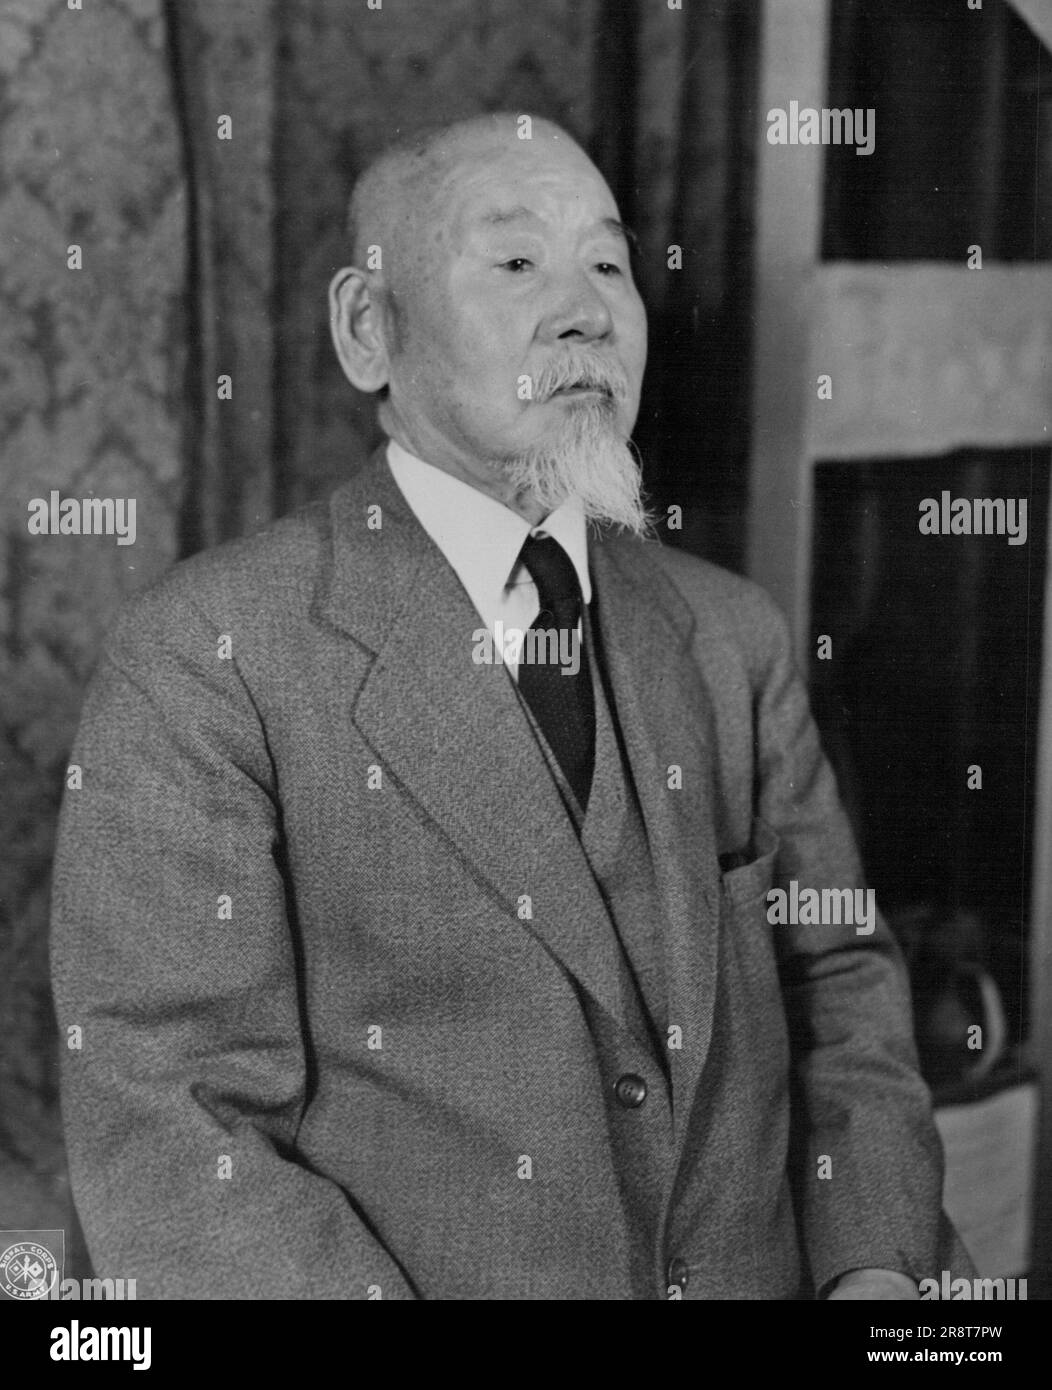 Major Japanese War Criminals on Trial in Tokyo -- Minami, Jiro, former General and member of the privy council from 1942 to 1945. War minister in 1931 and commander in chief of the Kawantung army from 1943 to 1936, is on trial at the international military tribunal for the east, Tokyo, Japan. June 19, 1947. (Photo by Skinner, U.S. Army Signal Corps). Stock Photo